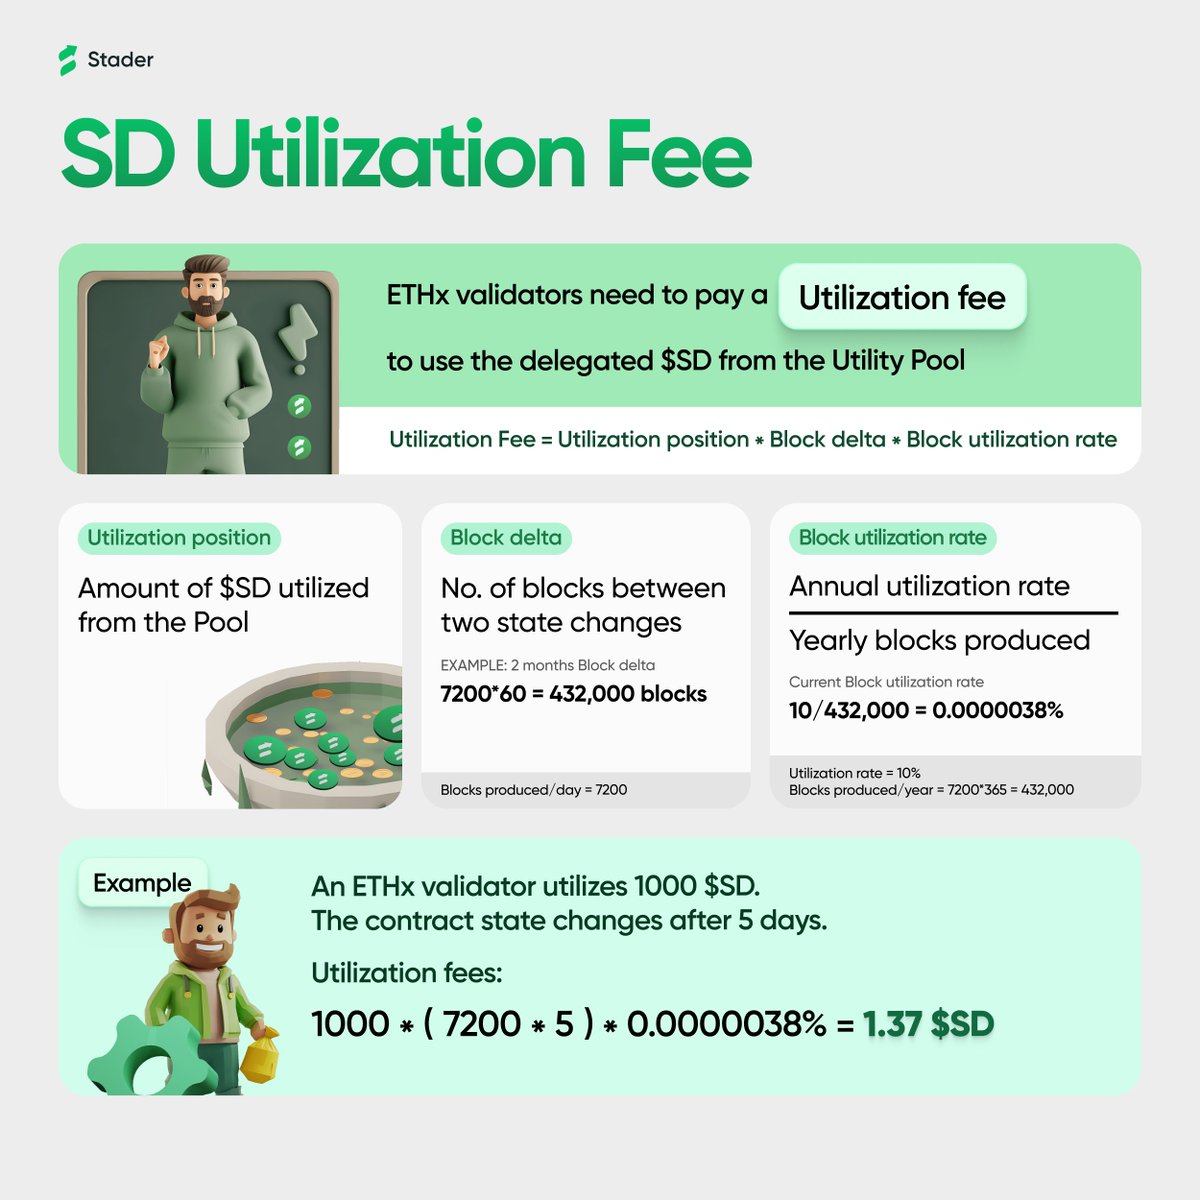 ETHx validators pay a fee to SD Utility Pool to utilize $SD. But do you know how the utilization fee is calculated? Here's an infographic explaining the fee mechanism. 👇